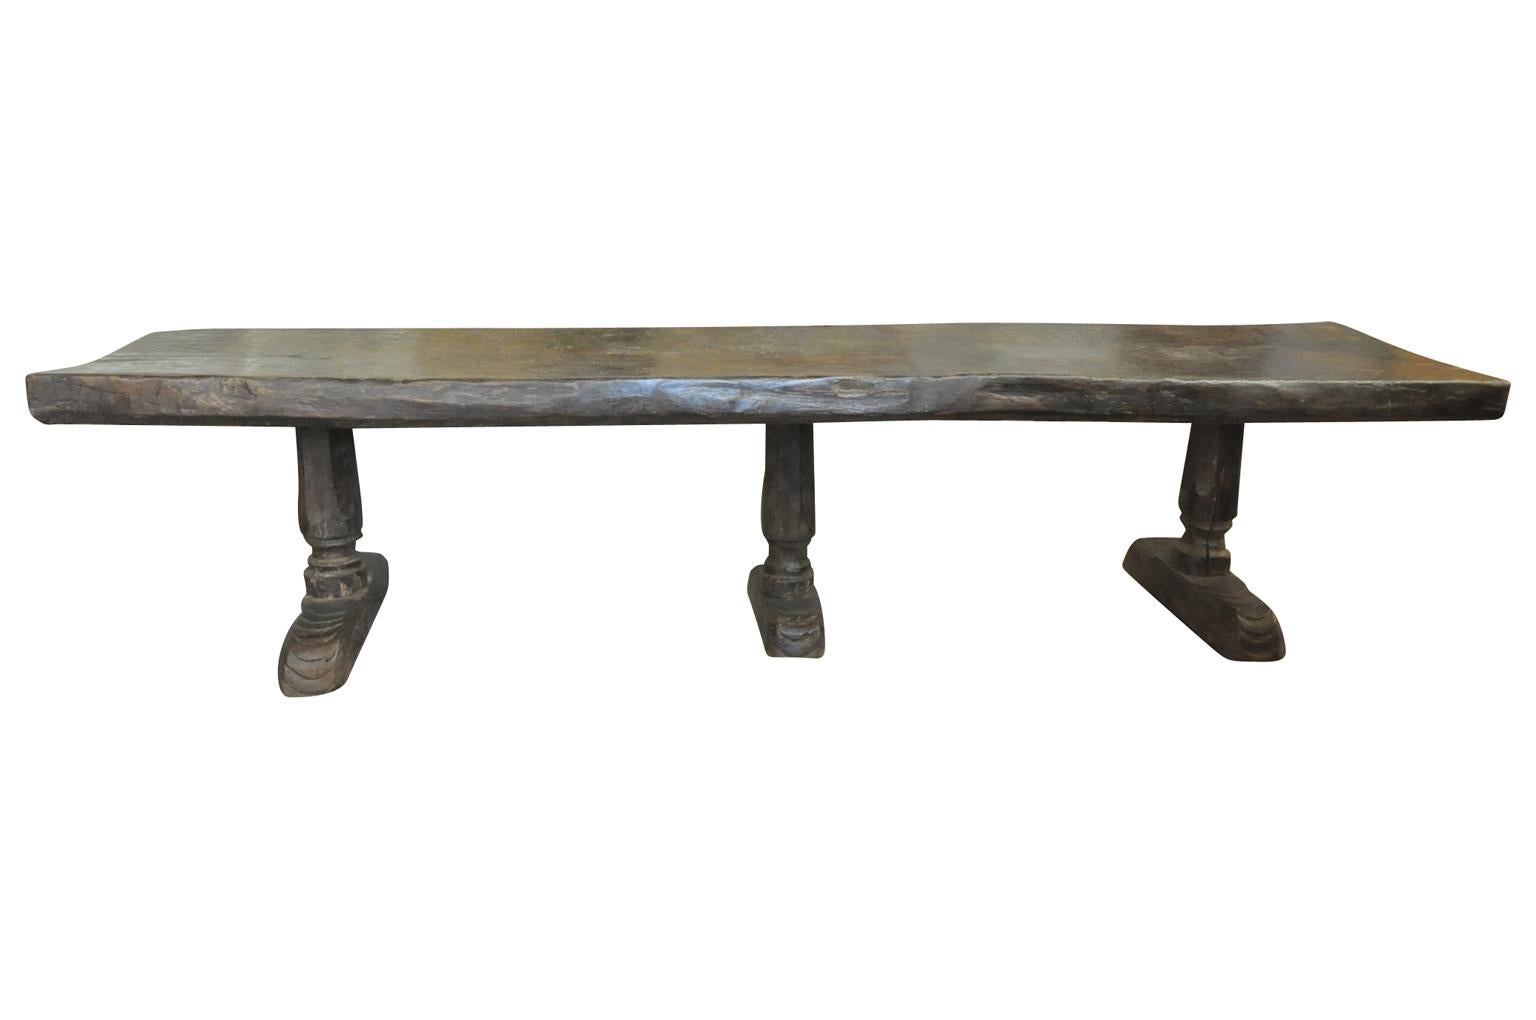 18th Century and Earlier Monumental and Very Rare Pair of 16th Century Spanish Castle Tables For Sale